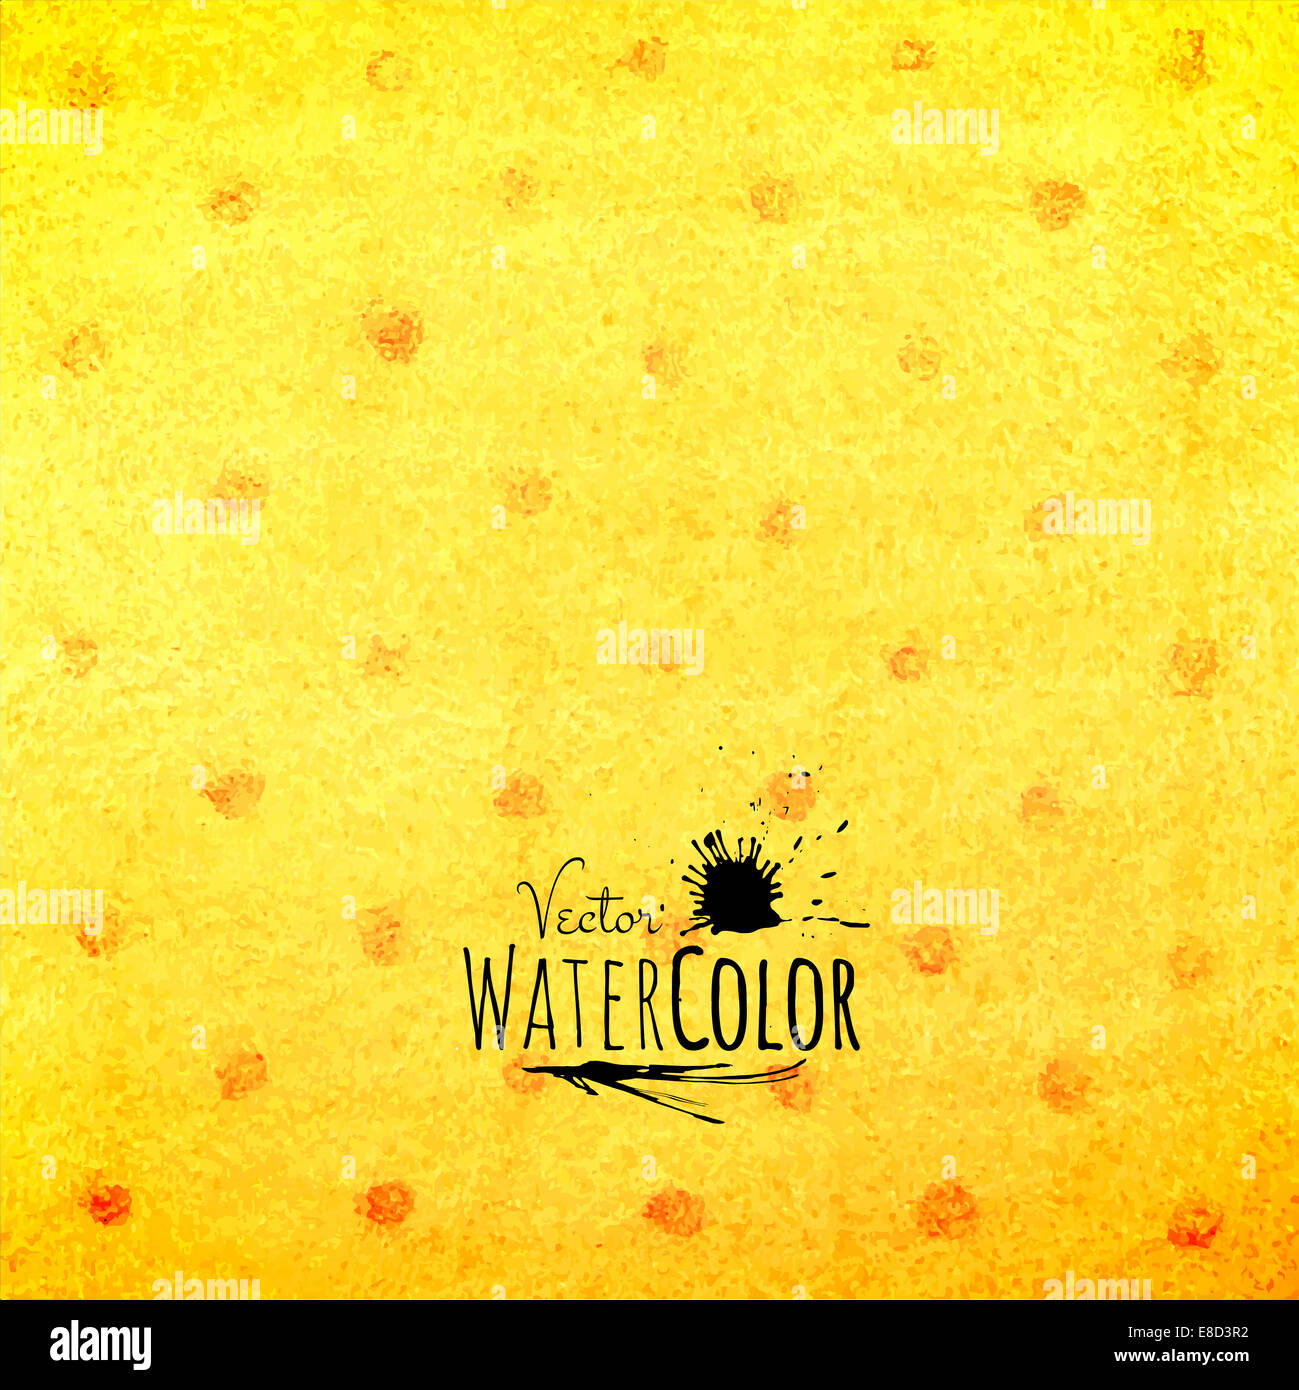 Watercolor polka dot pattern, yellow orange and red colors Stock Photo